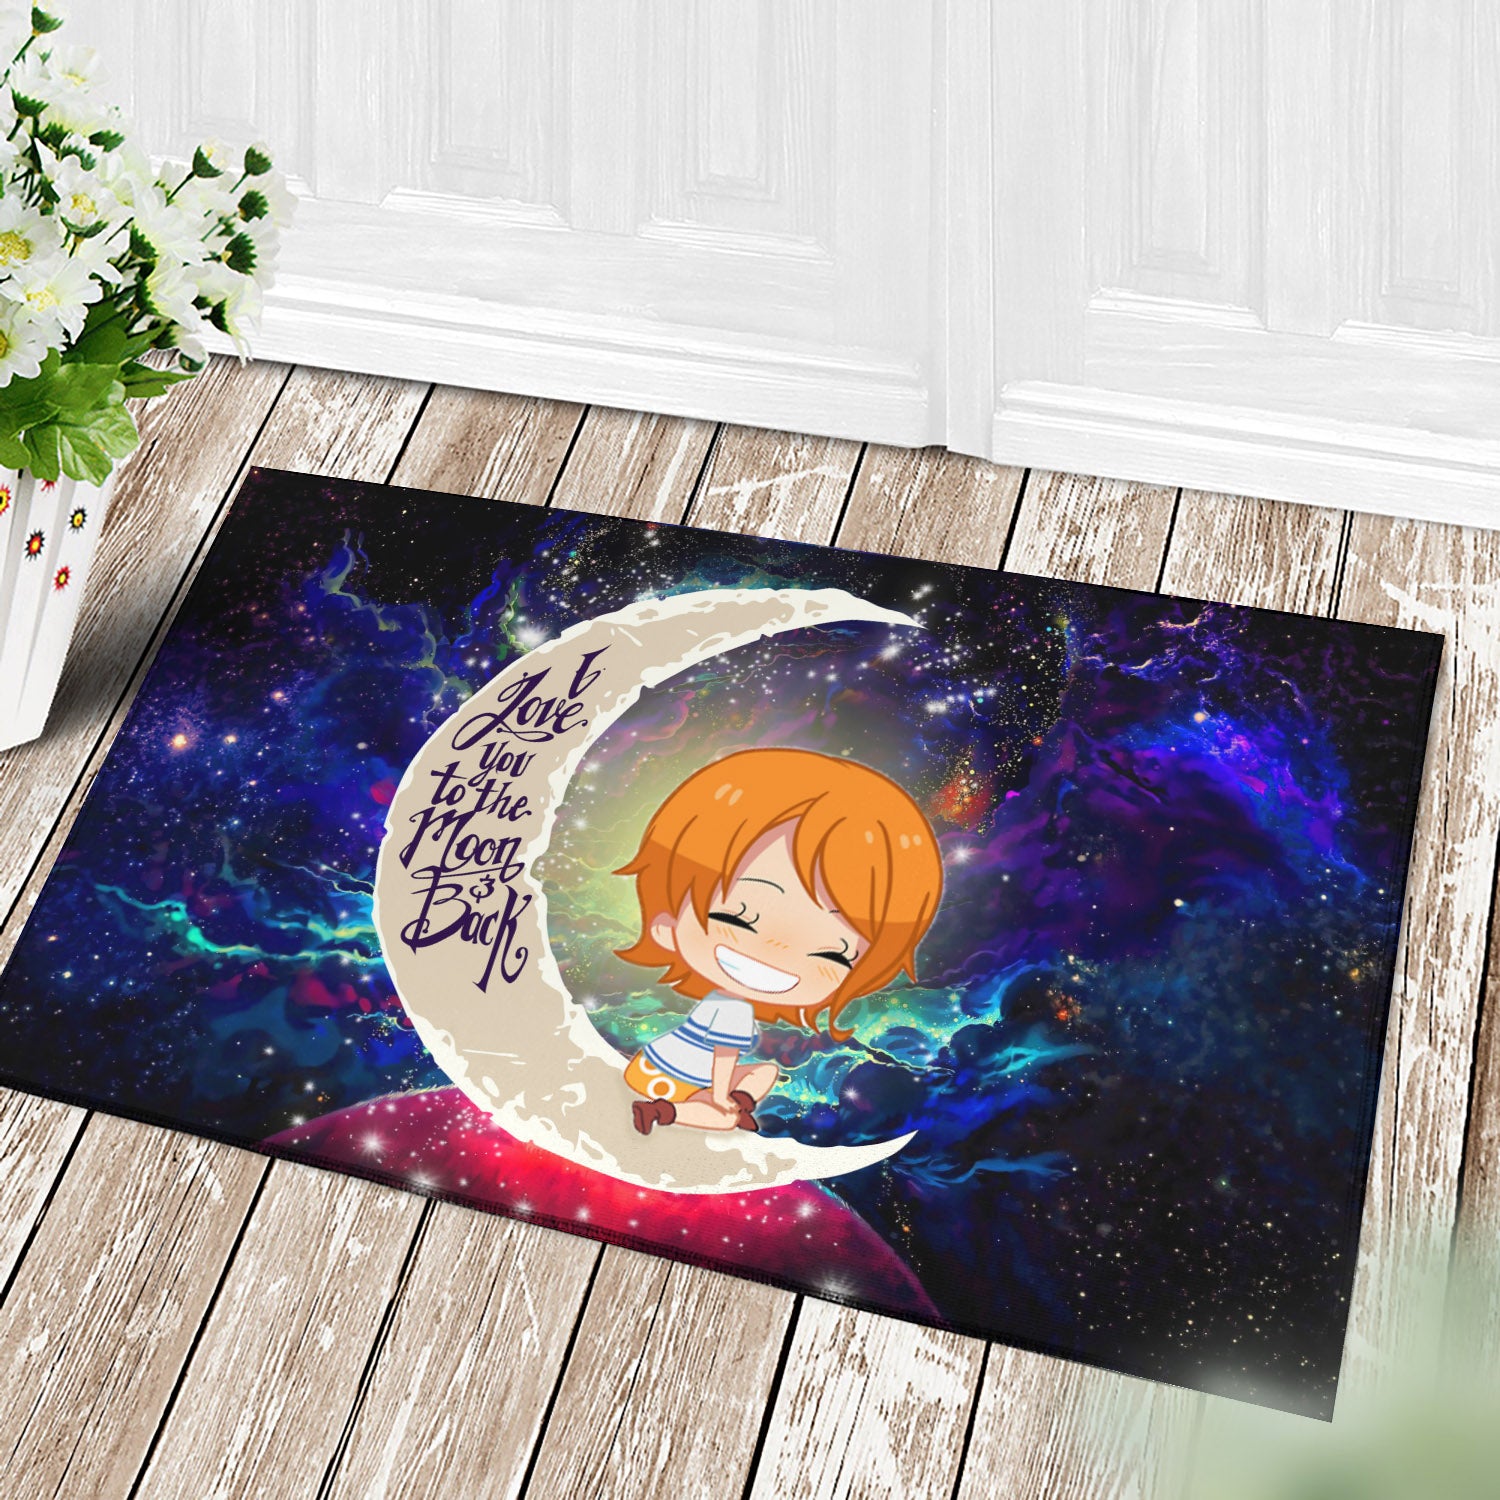 Nami One Piece Love You To The Moon Galaxy Back Door Mats Home Decor